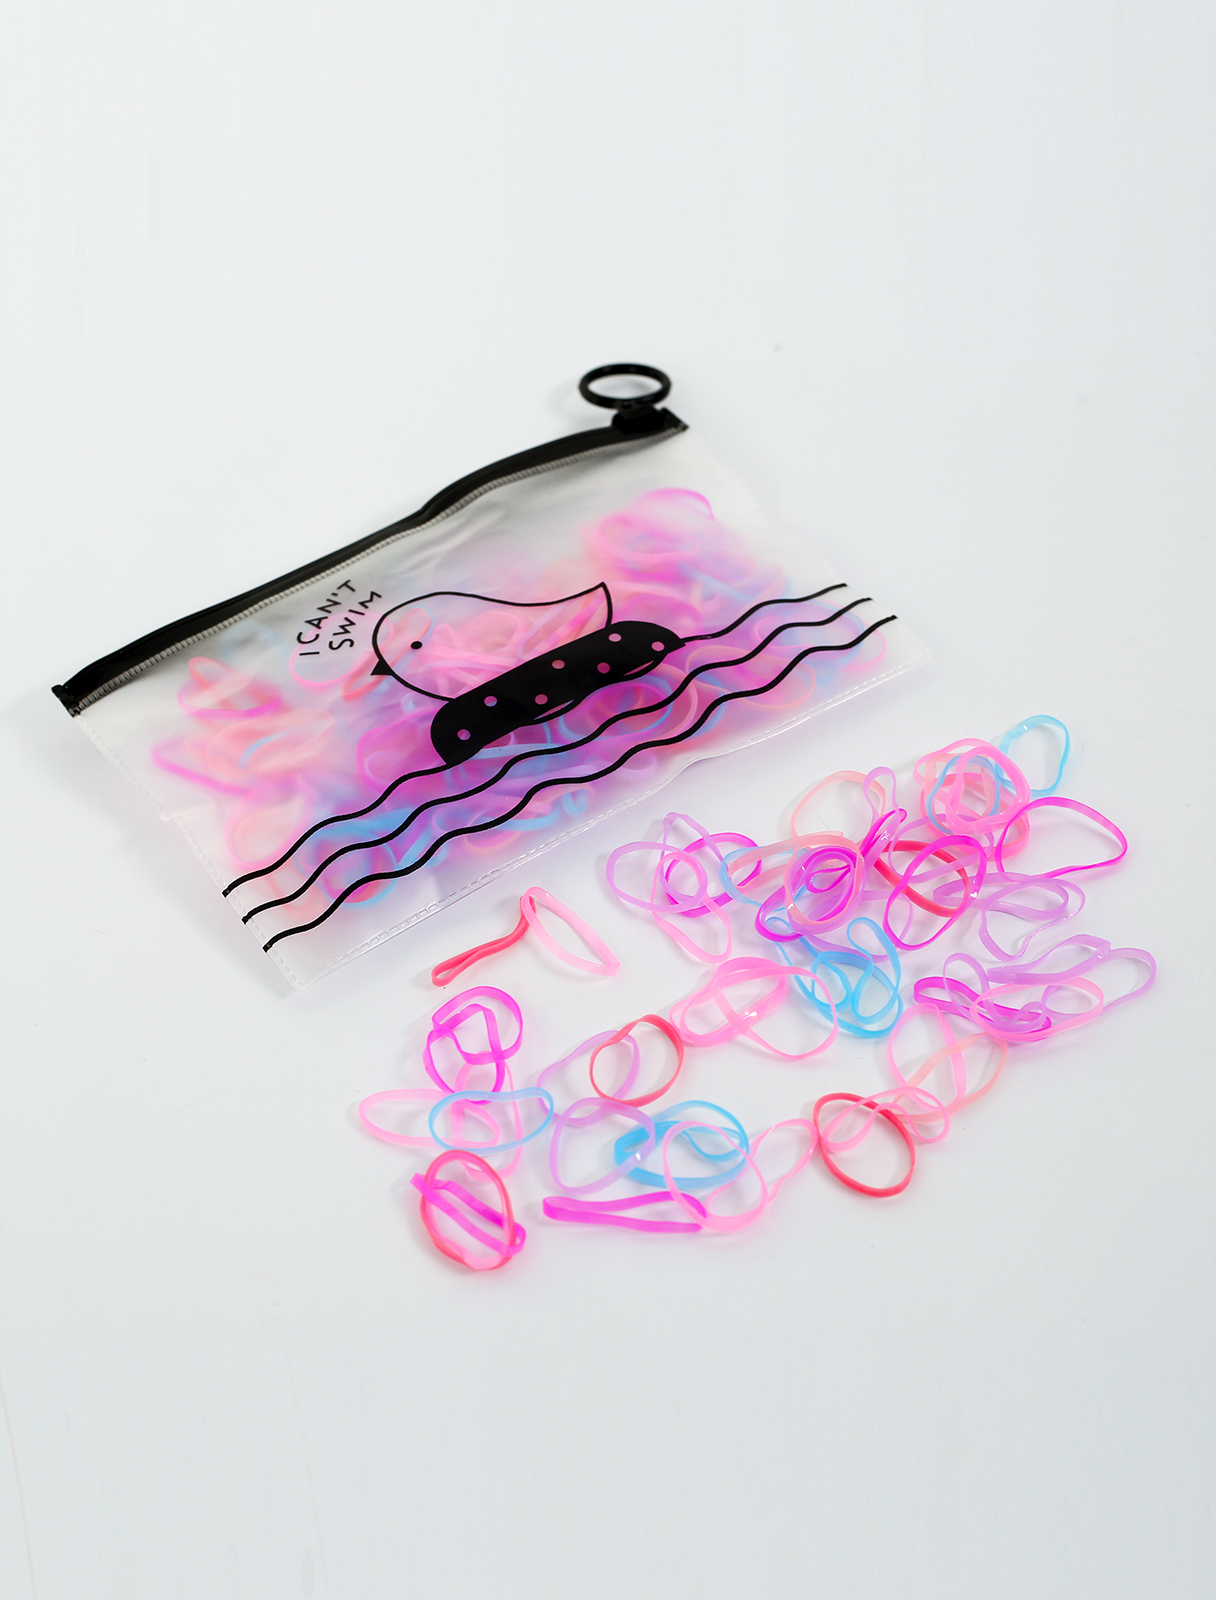 A bag of hair ties, random colors, 200 pieces of rubber